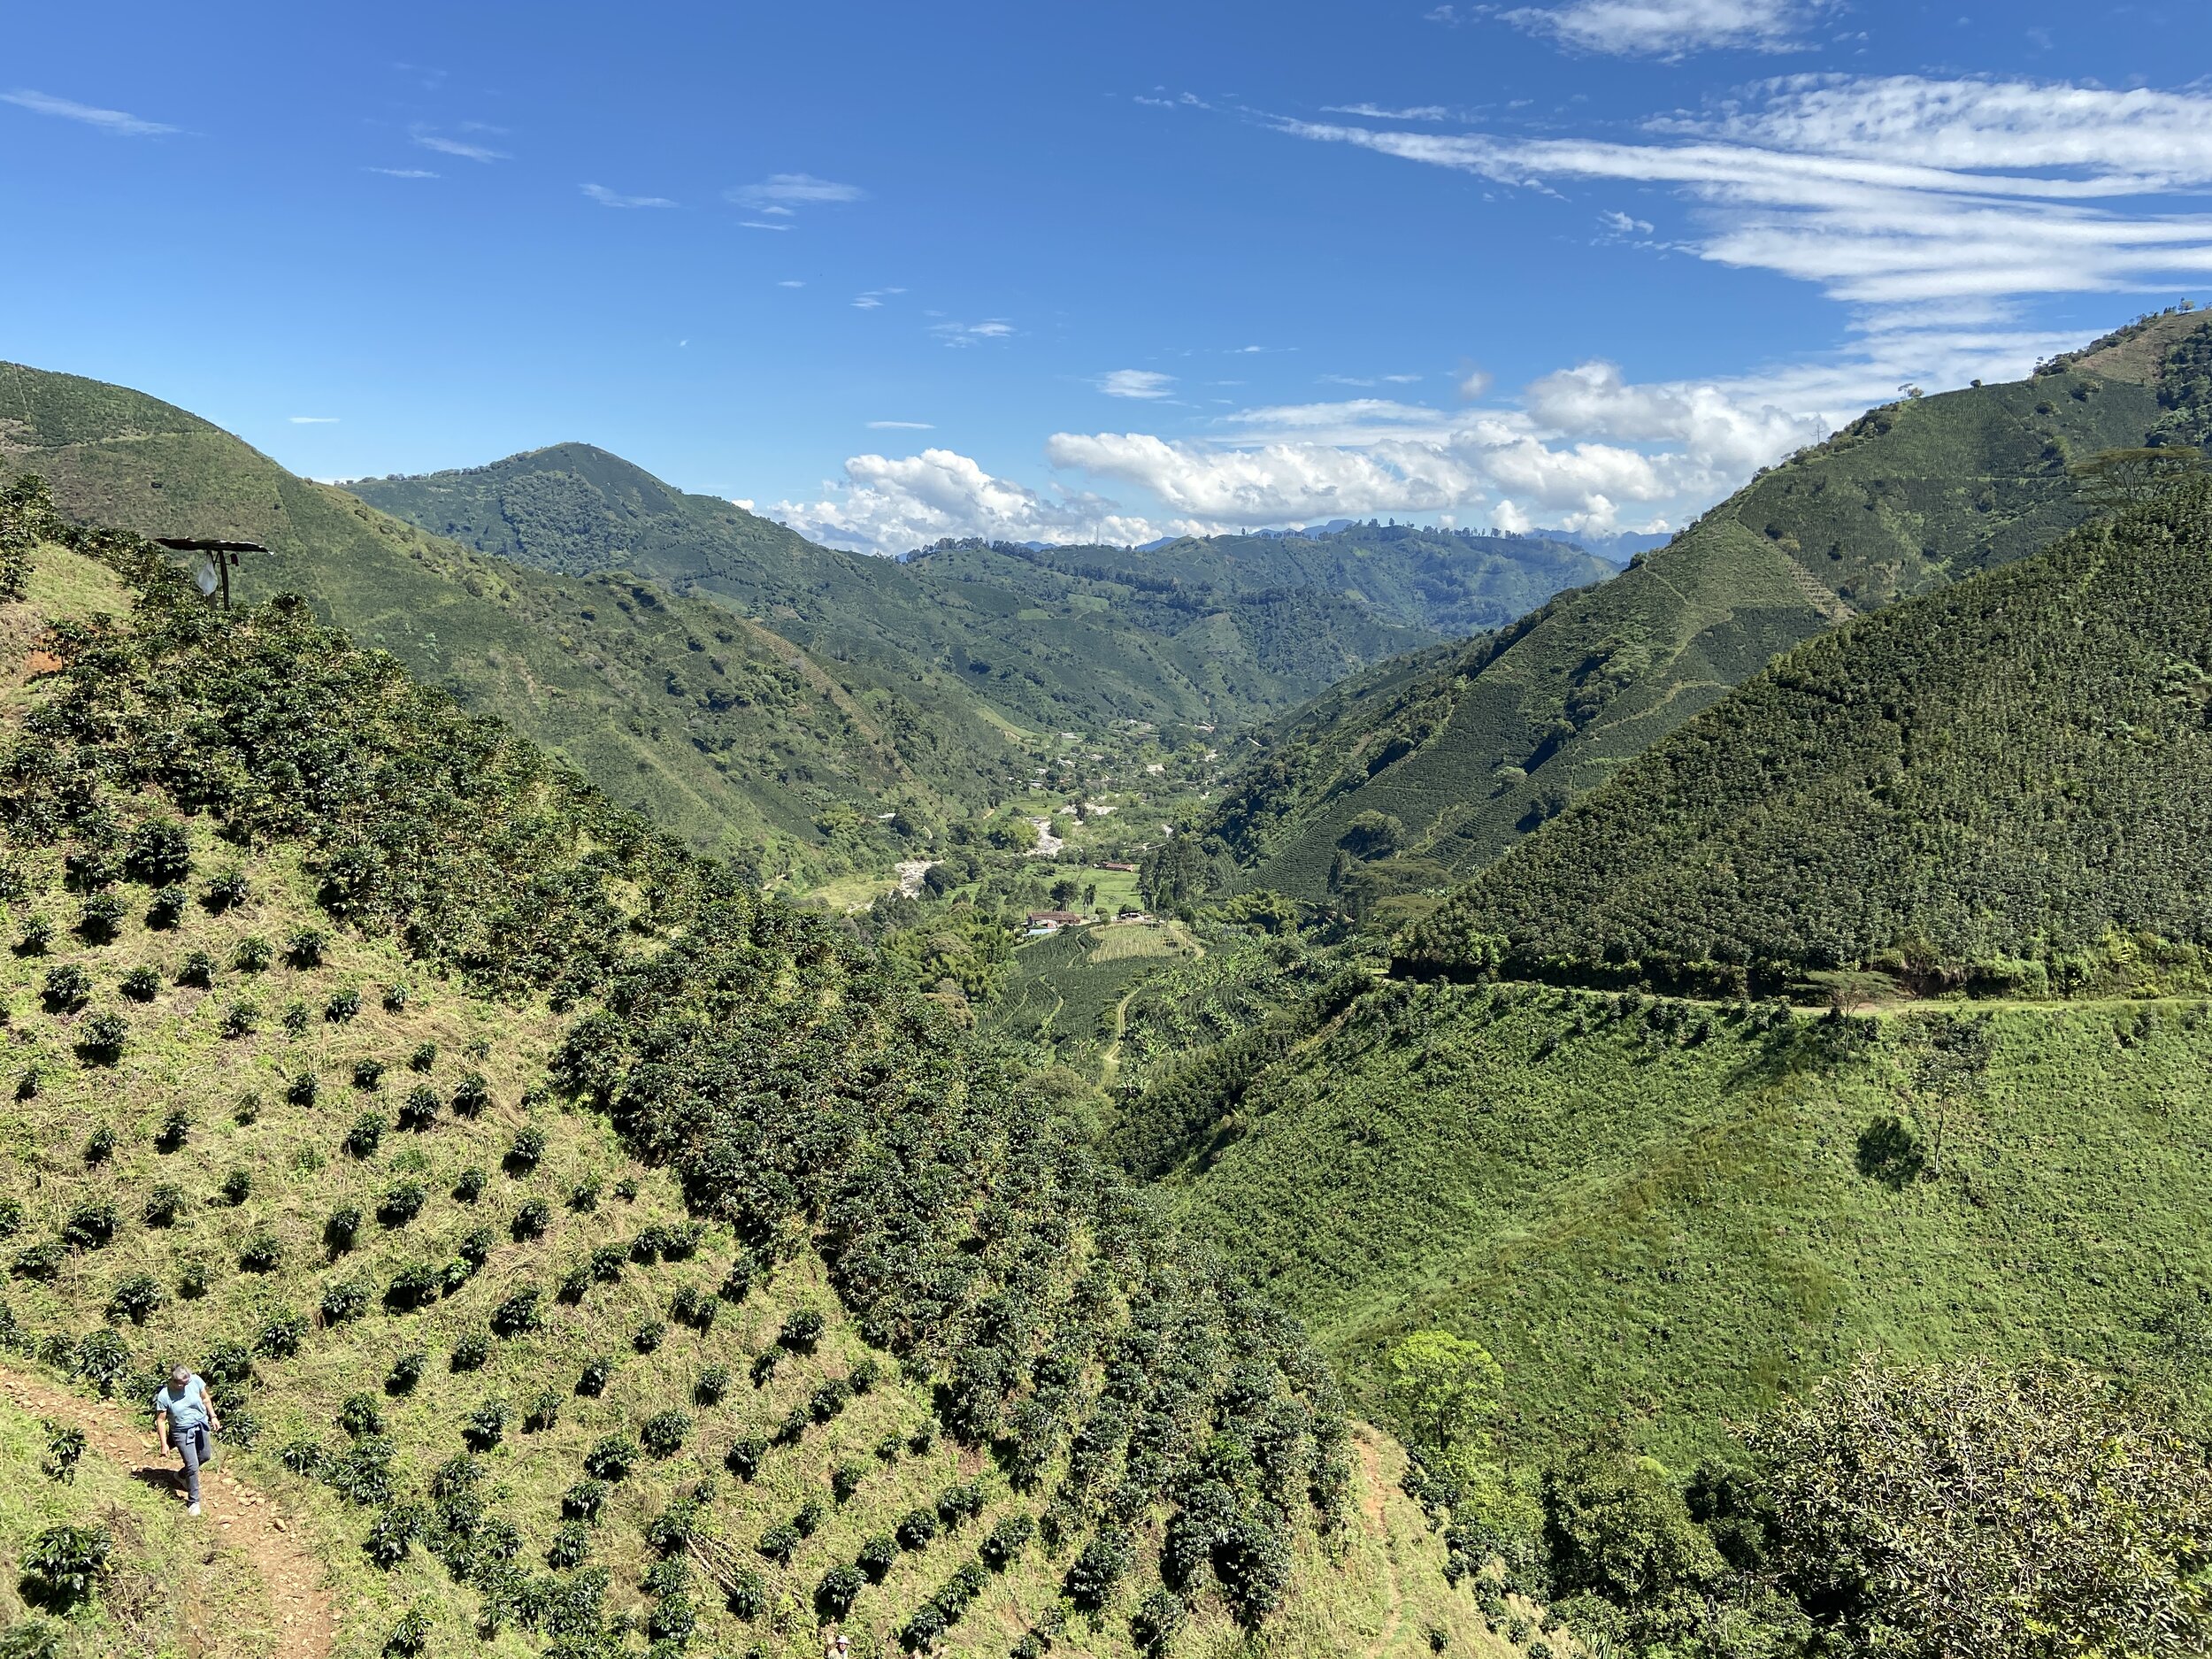  A view of one steep slope and the valley from a hillside on El Silencio 